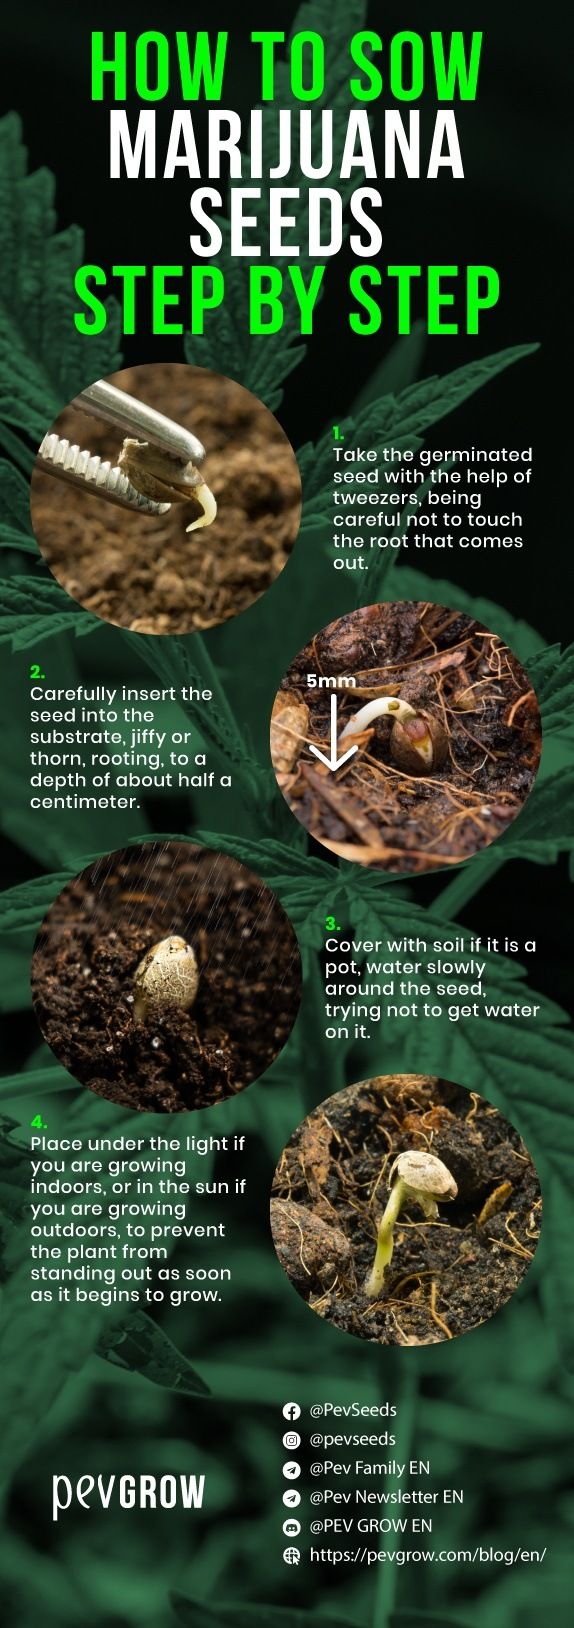 Infographic on how to sow marijuana seeds step by step